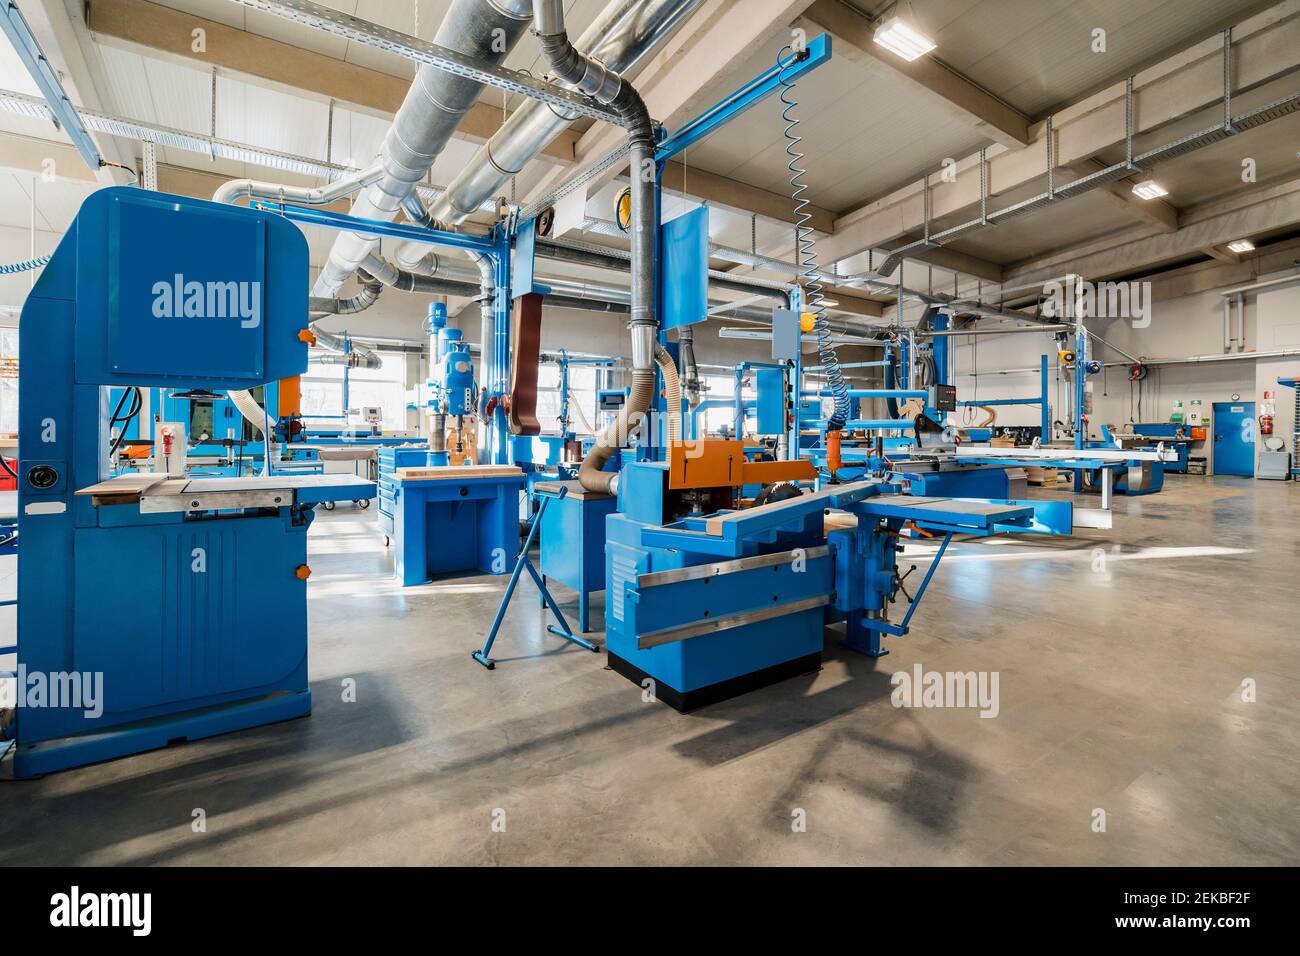 Wood manufacturing equipment at industry Stock Photo